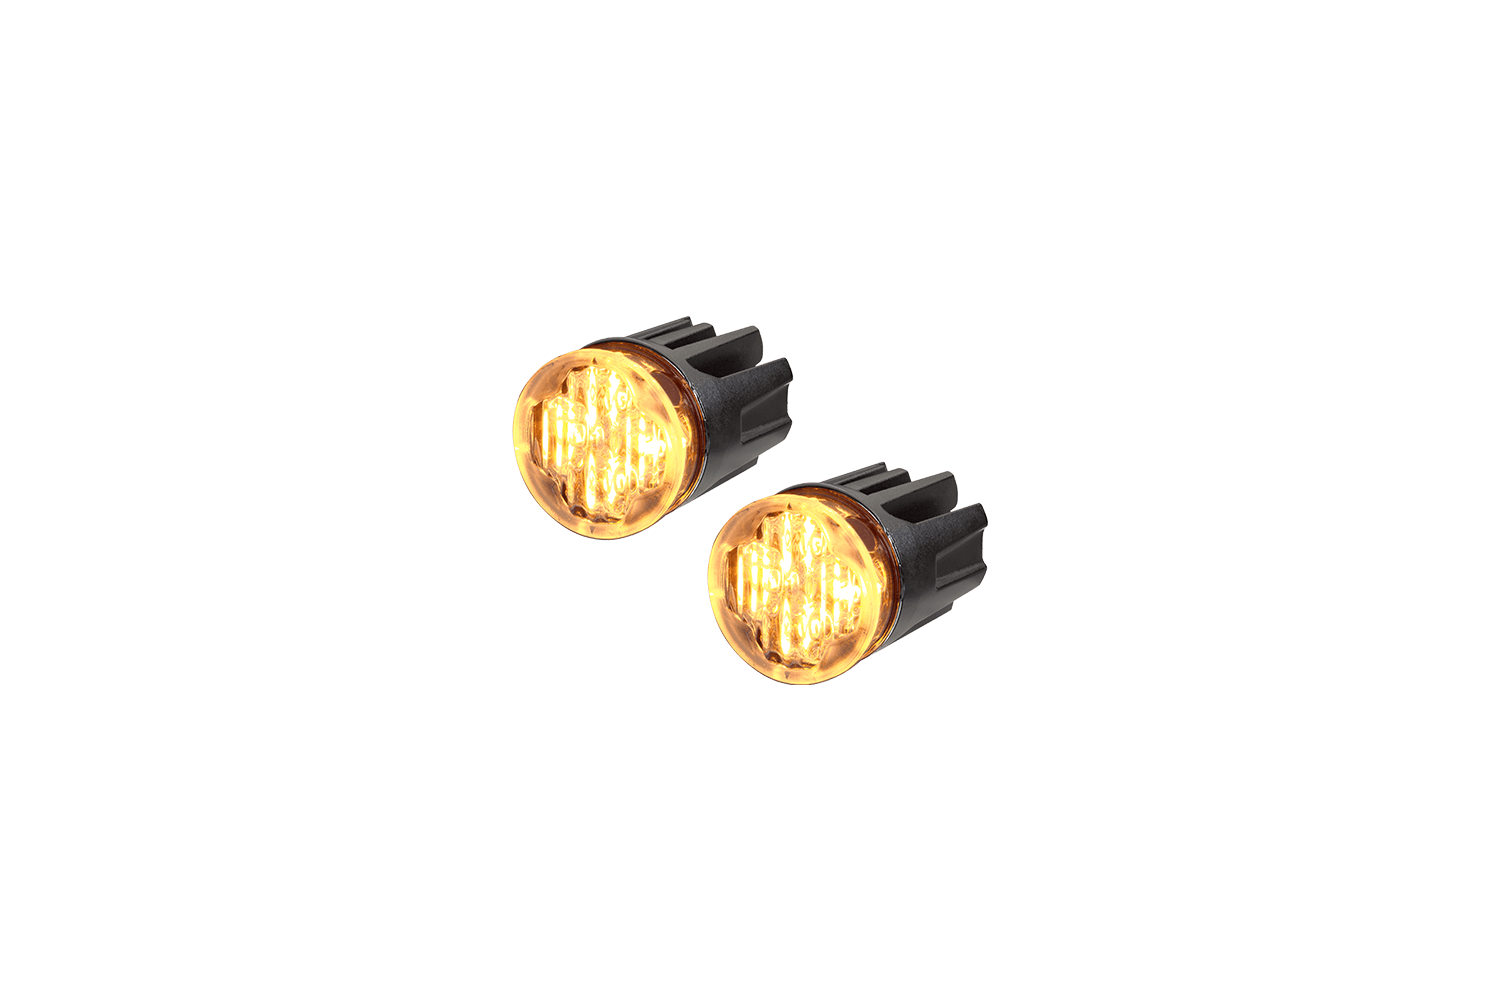 BST-Round warning lamp from Hella offered by Patlon